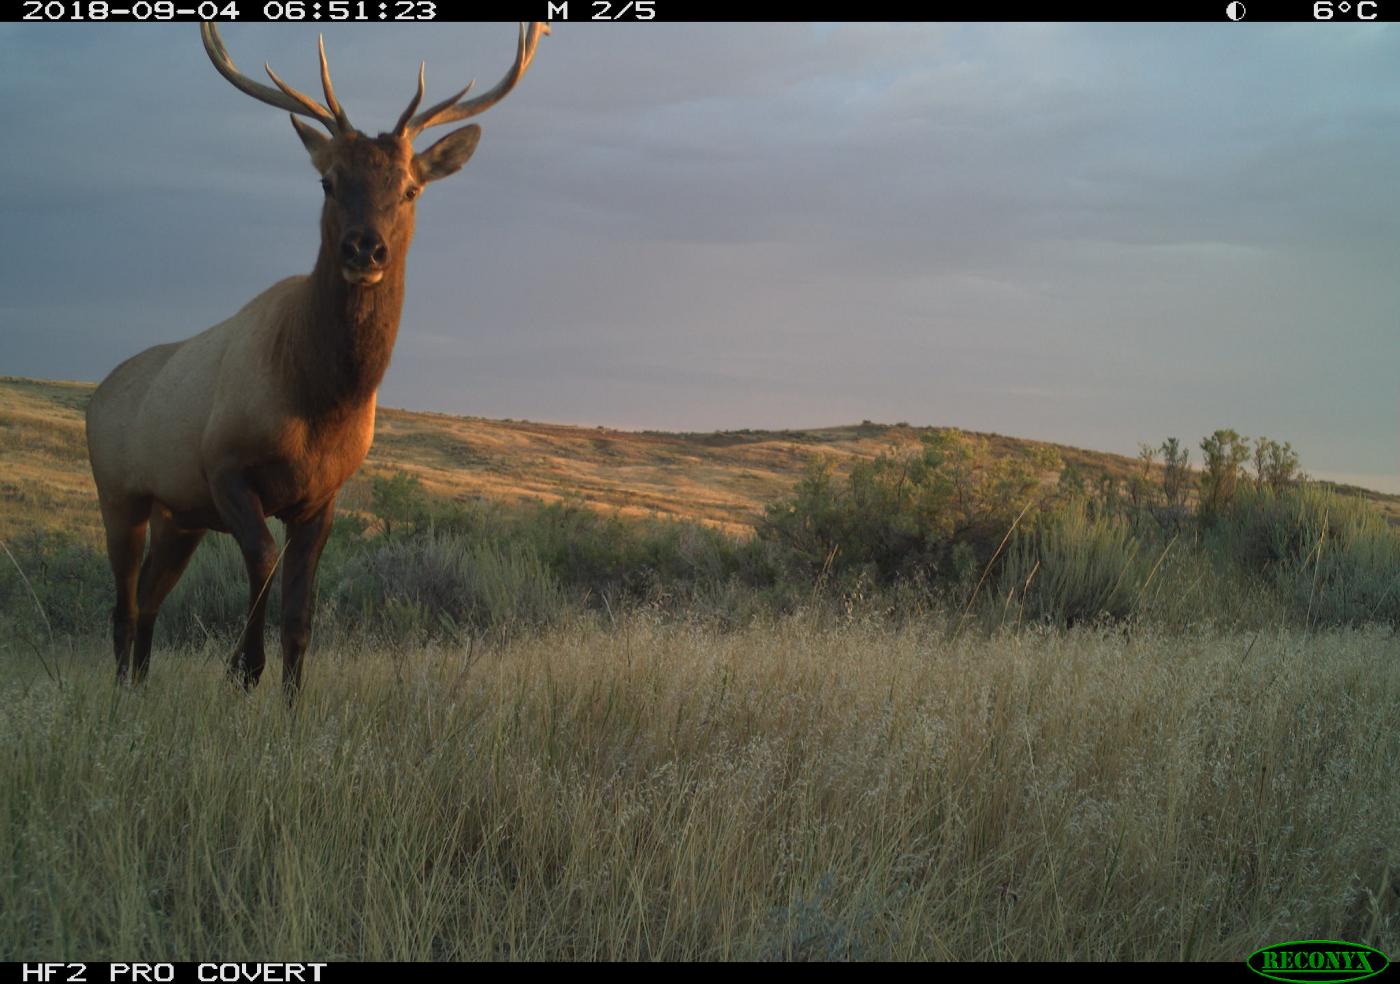 A camera trap photo of an elk (Cervus canadensis) standing in the grass at dusk in the American Prairie Reserve in Montana